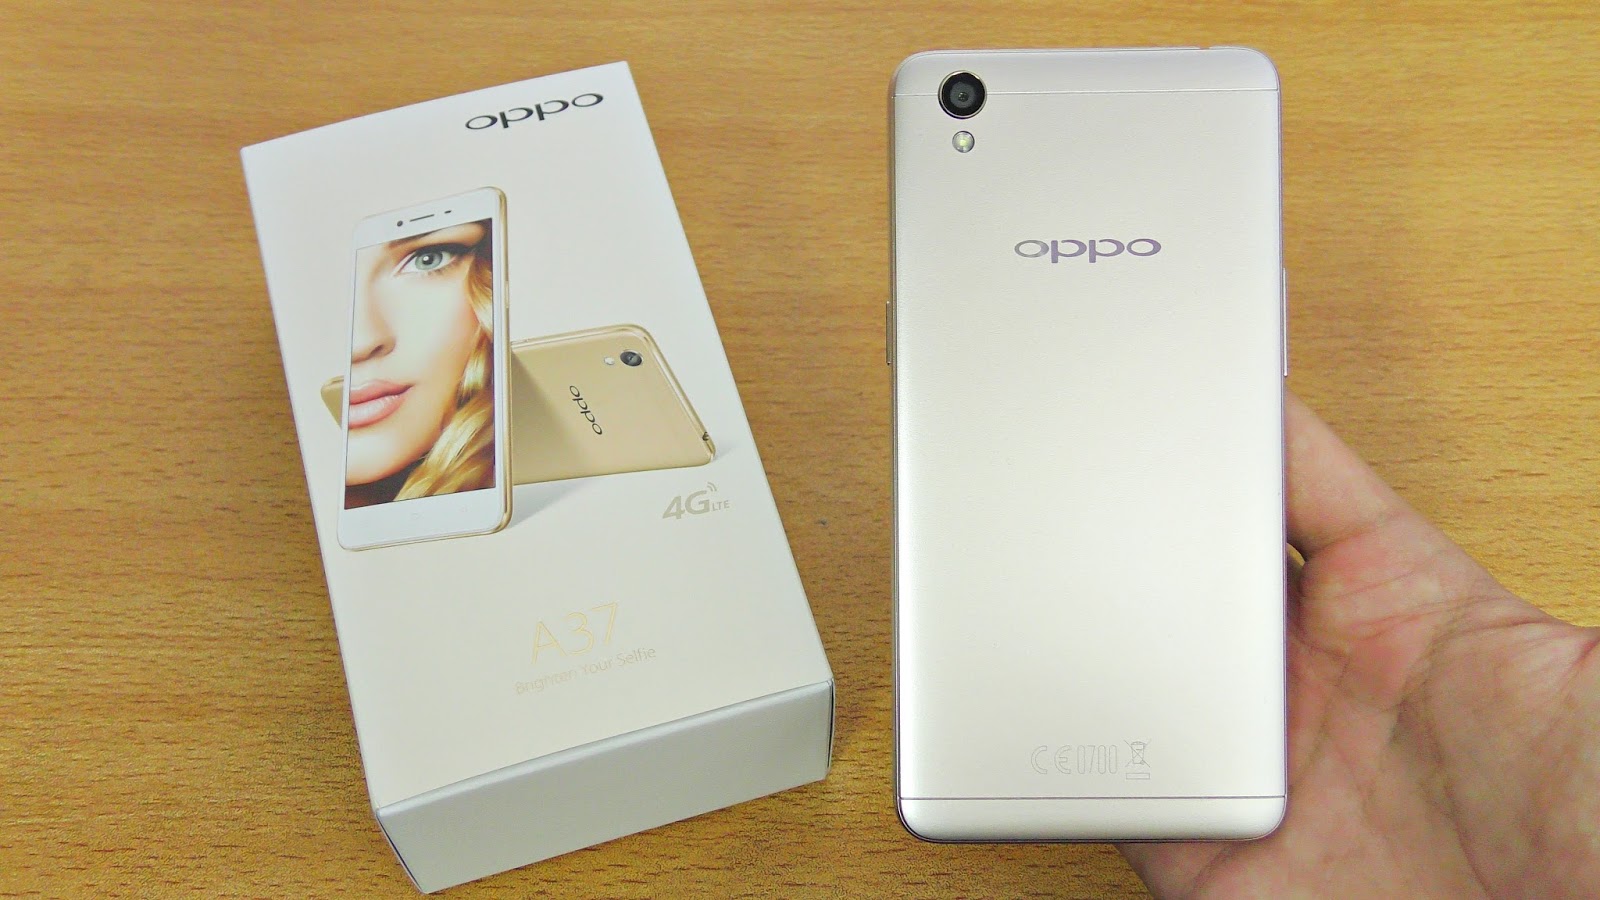 Oppo A37 ANDROID Mobile Phone Price And Full Specifications in